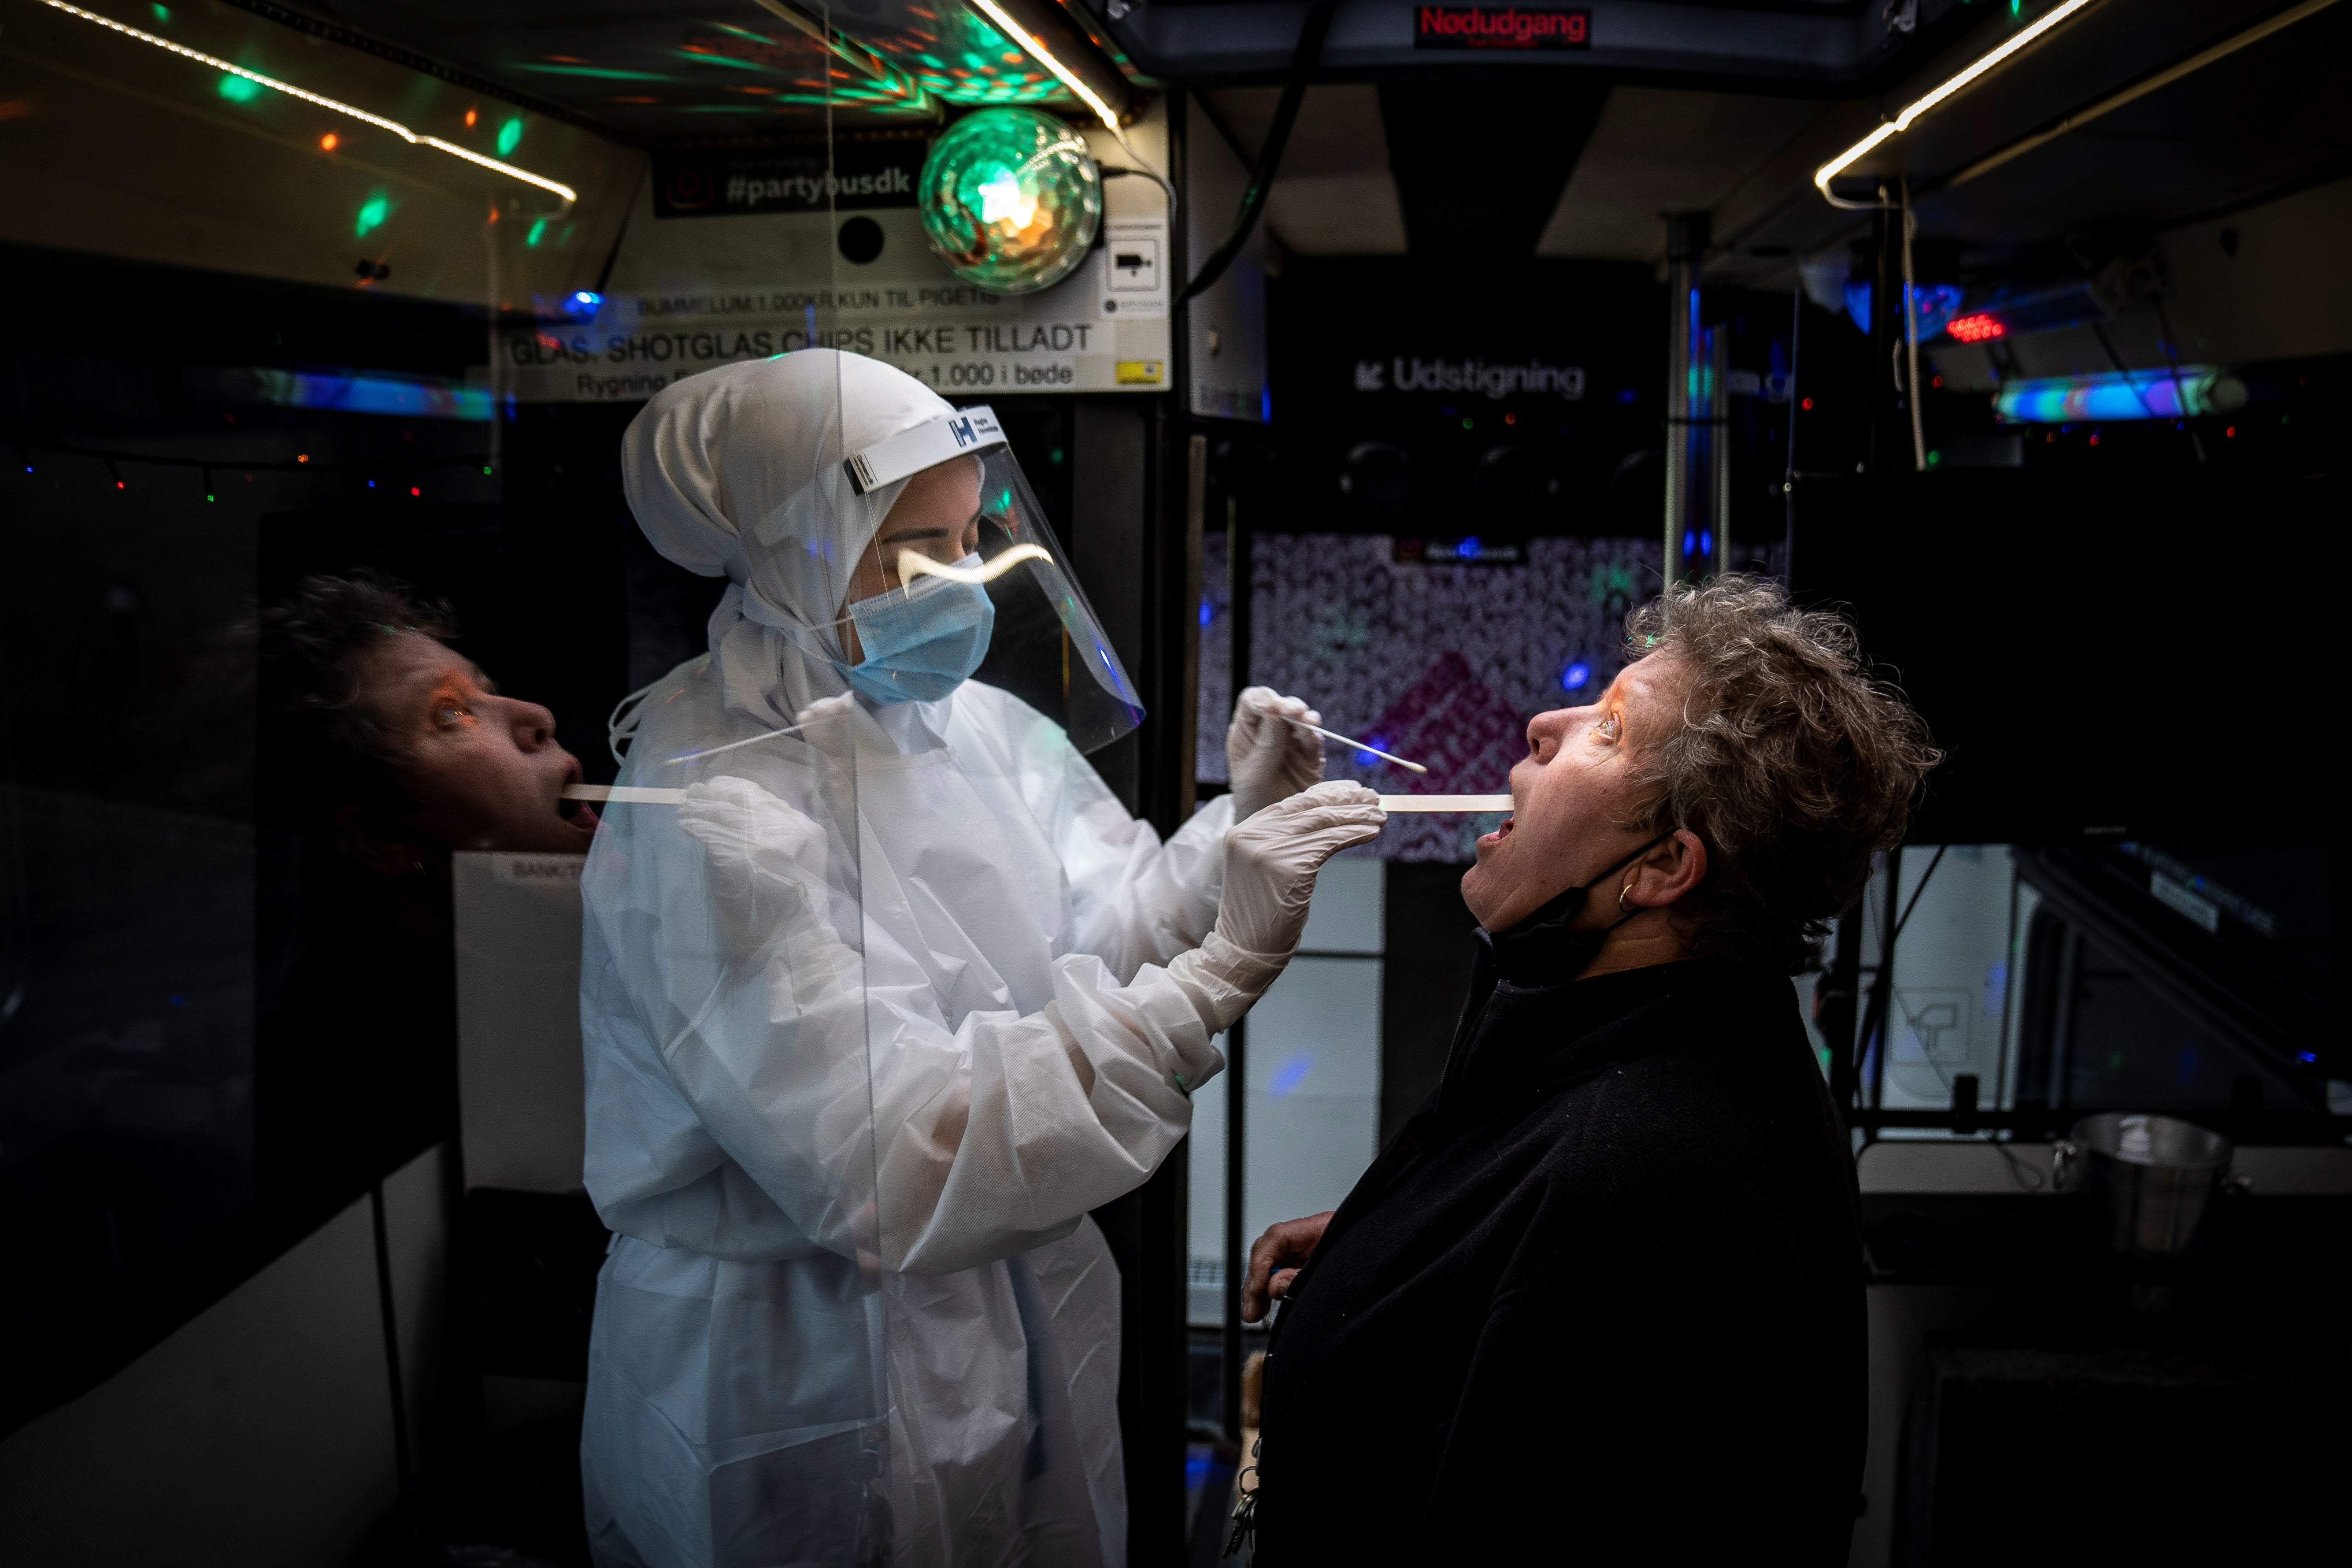 A healthcare worker takes a swab sample from a person in the Partybus, where people can listen to music while being tested, in Ishoej, Denmark